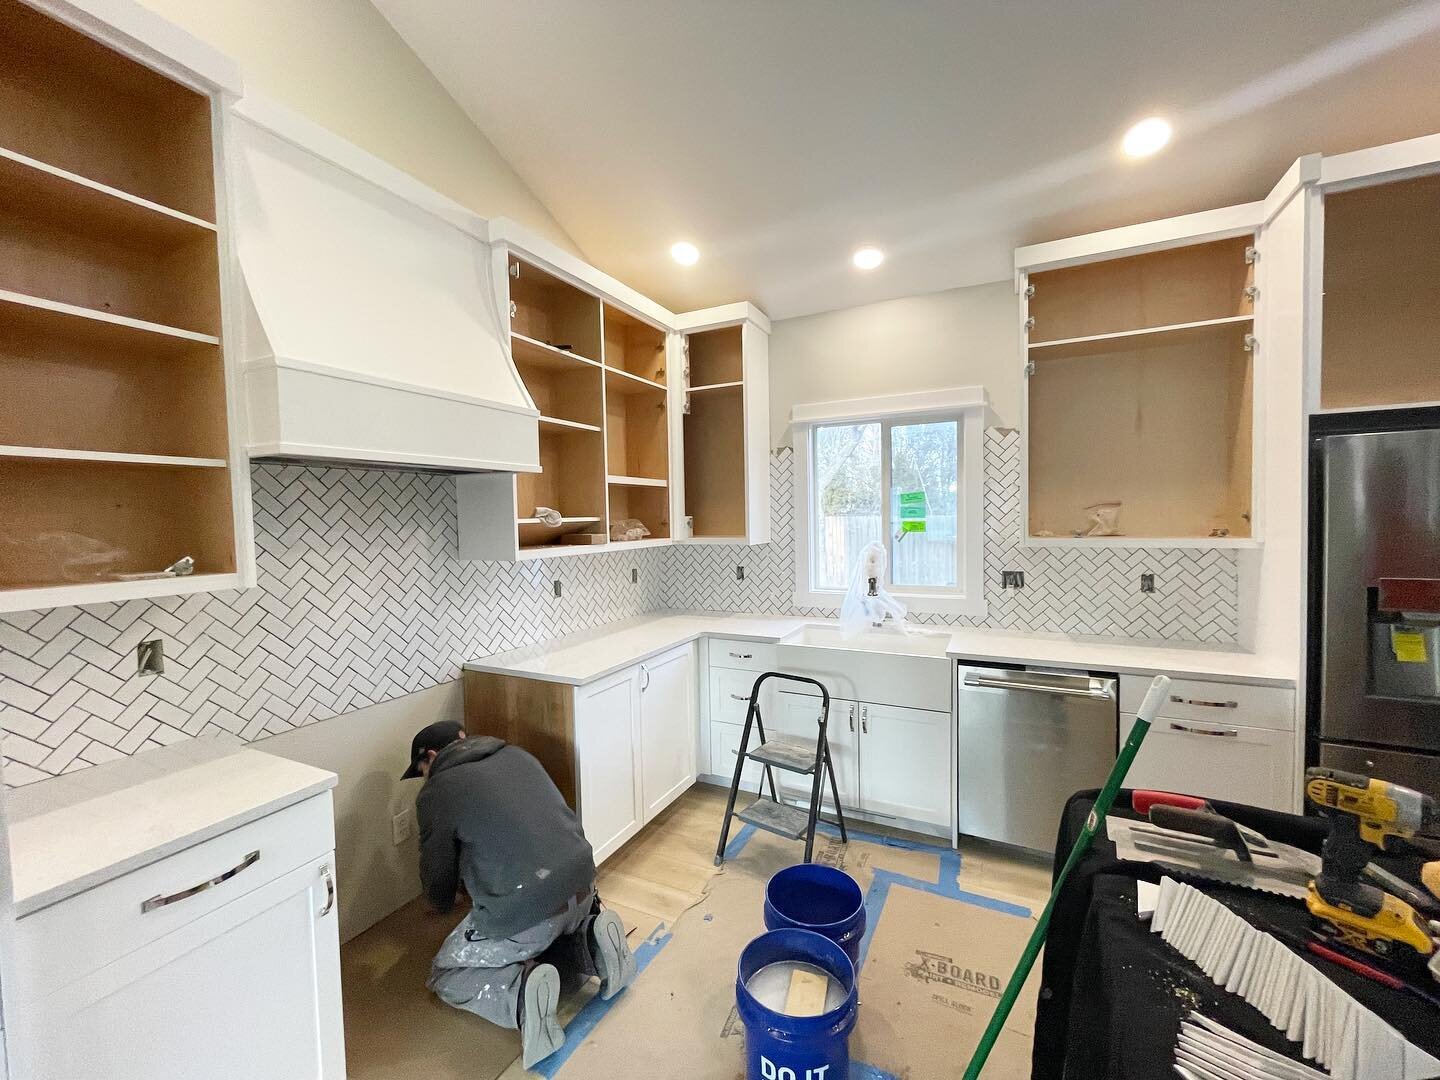 She&rsquo;s finally taking shape! 
This gorgeous open concept kitchen is getting full height, white herringbone backsplash with white grout, In-house designed custom cabinets, and stunning new appliances!

Can&rsquo;t wait to see and share the final 